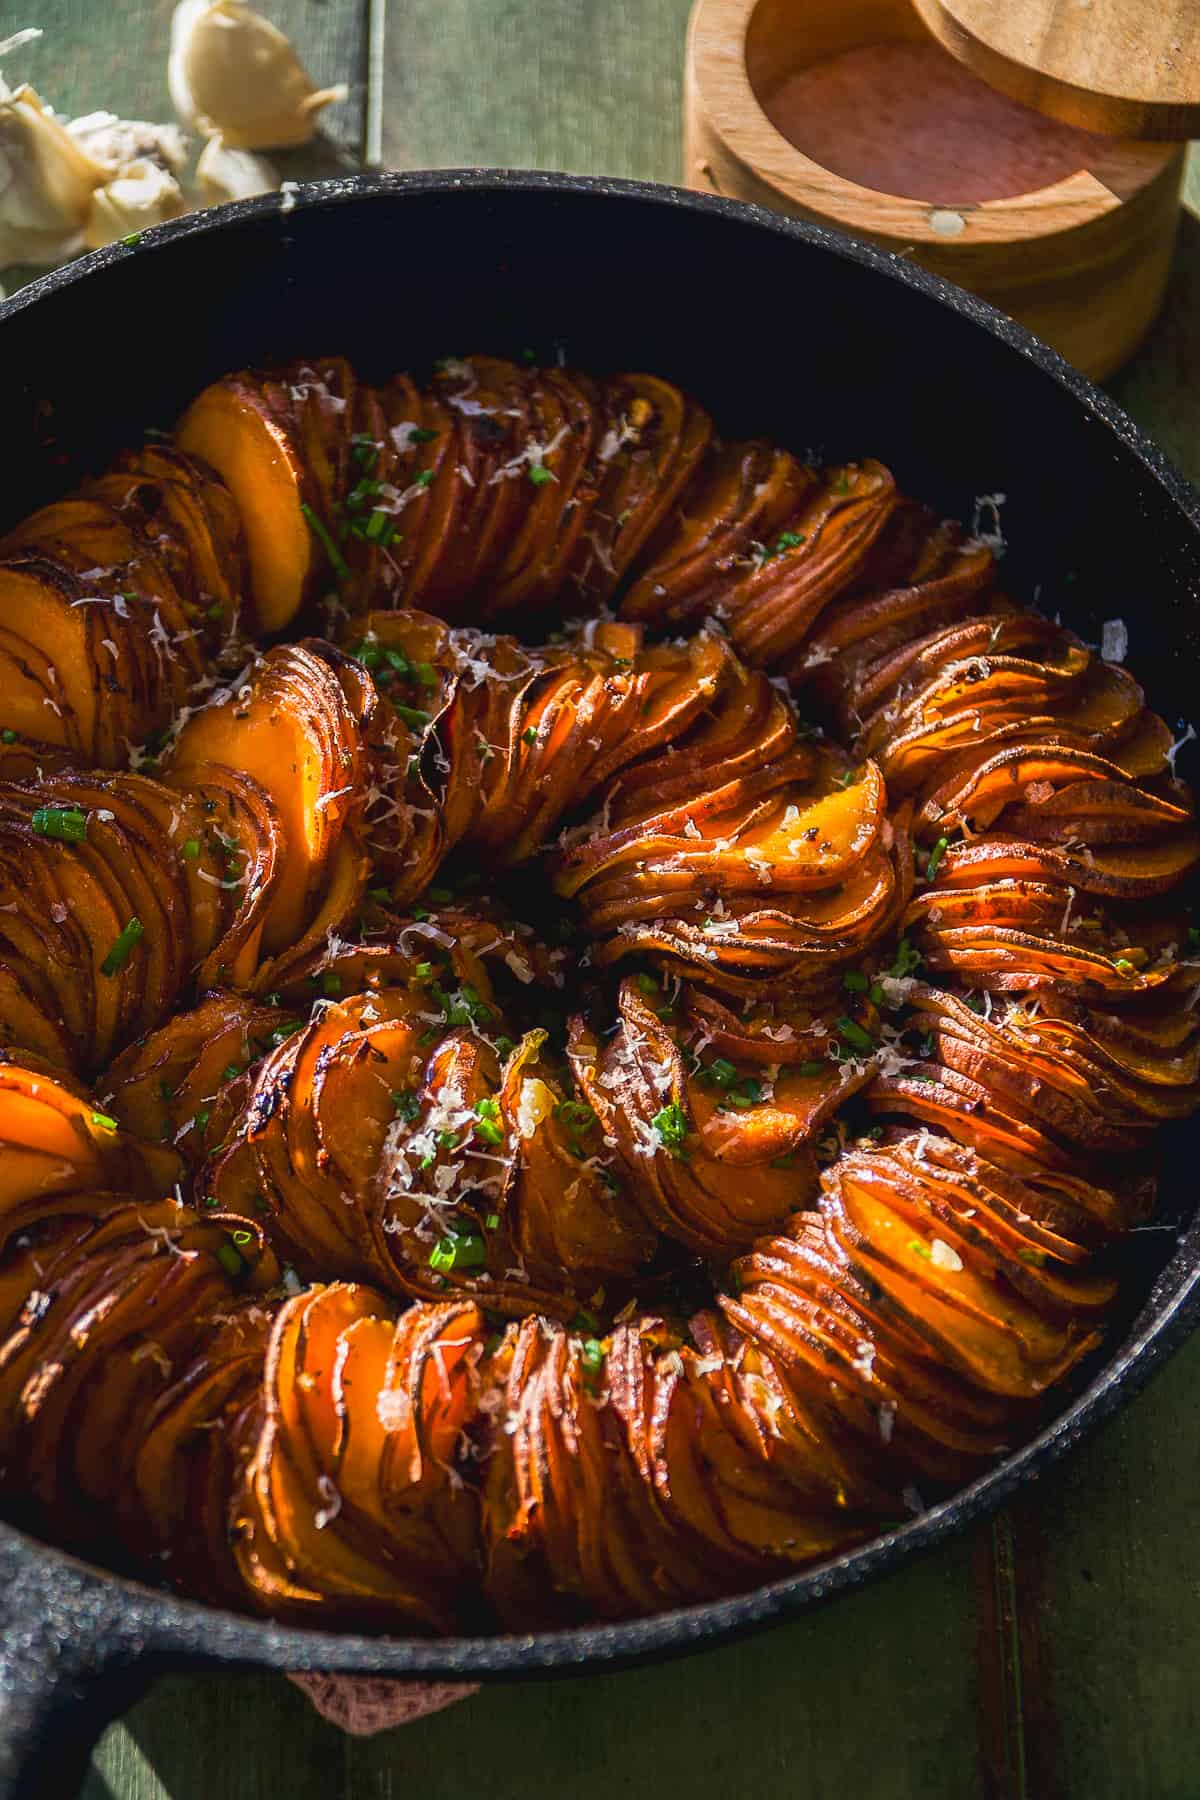 Scalloped sweet potatoes in a spiral cooked in a cast iron skillet.